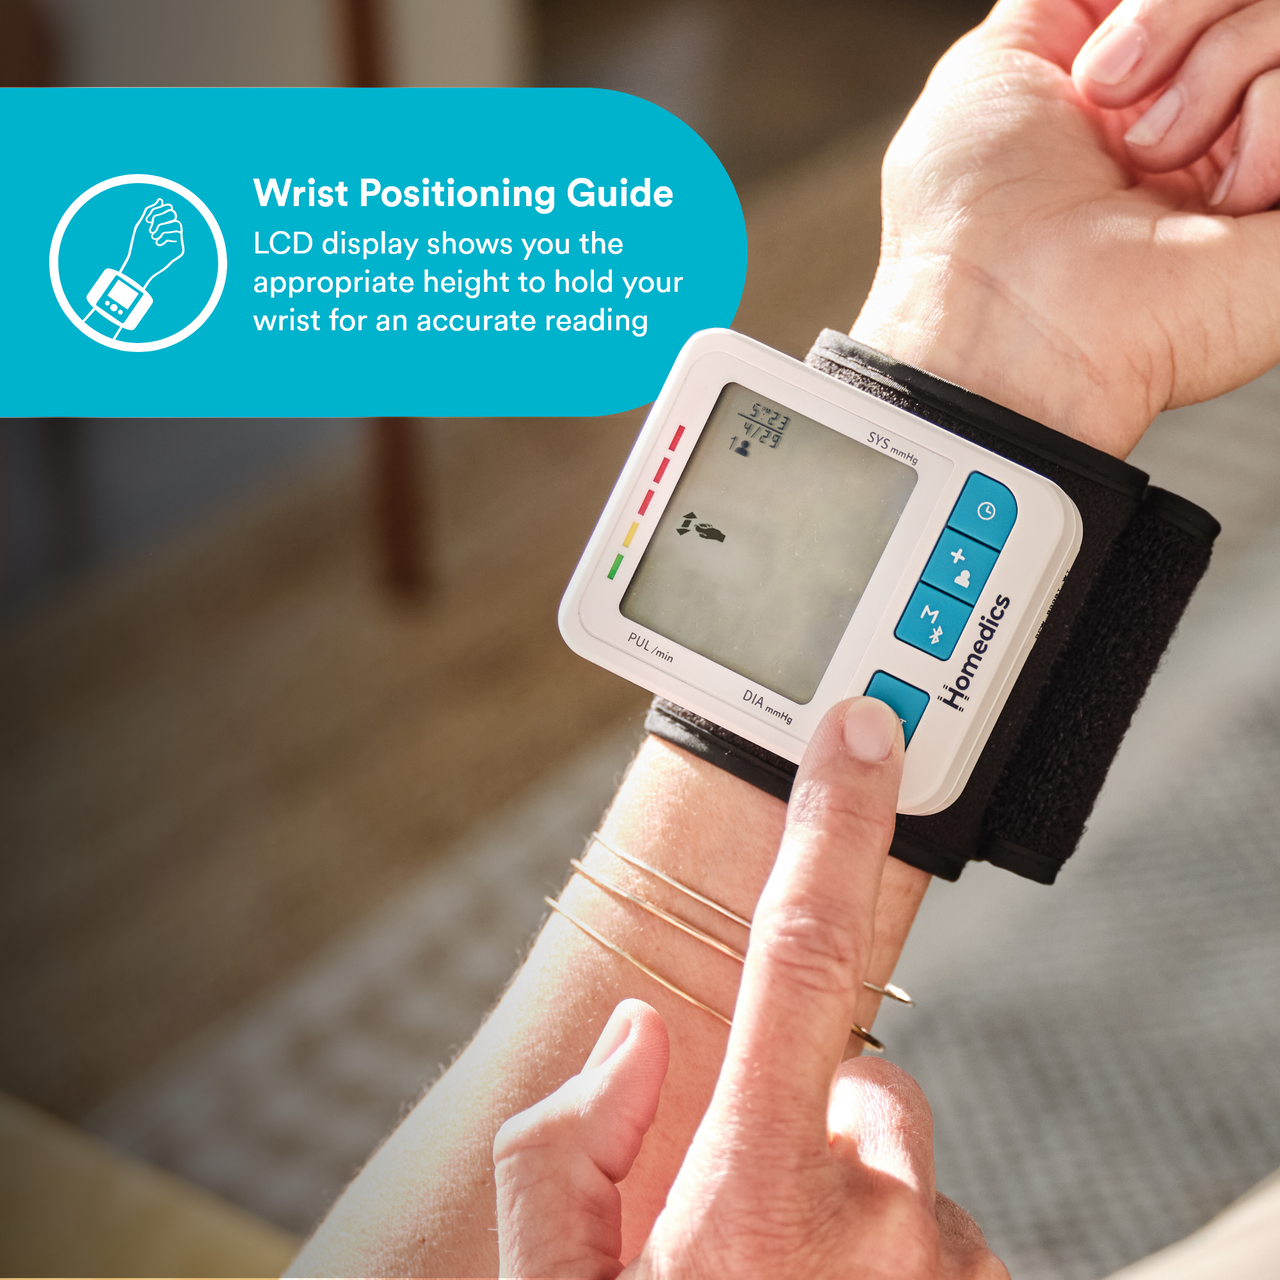 Homedics® 5-Day Trend-at-a-Glance Arm 700 Series Blood Pressure Monitor